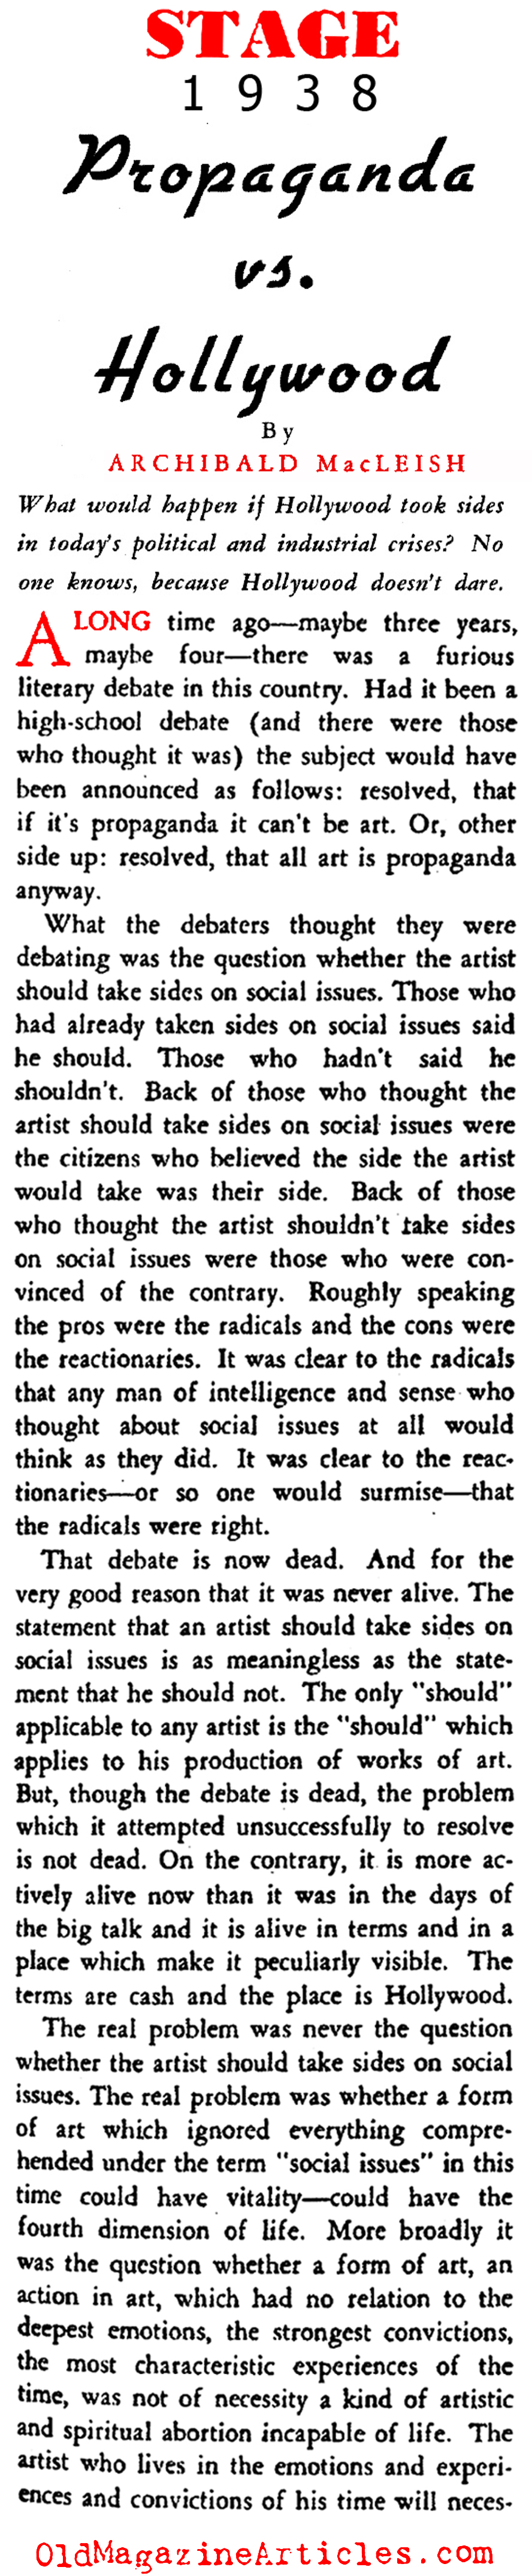 Social Issues in Movies (Stage Magazine, 1938)